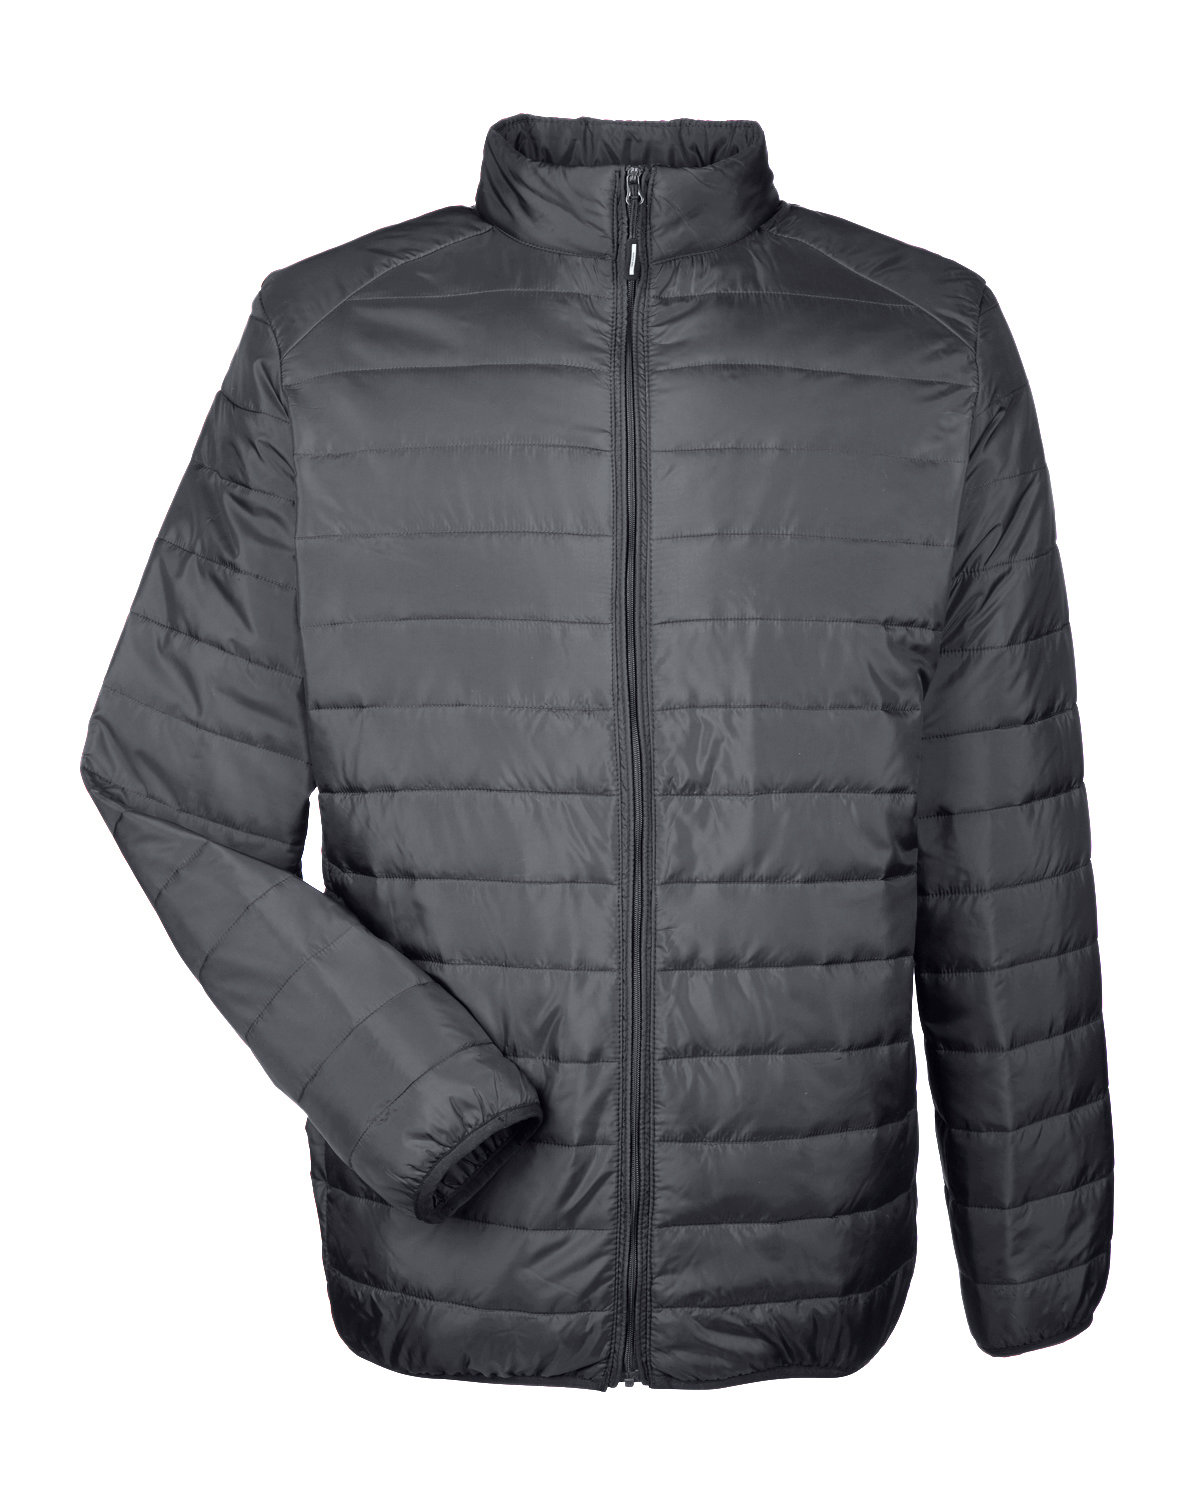 Core 365 CE700T - Men's Tall Prevail Packable Puffer